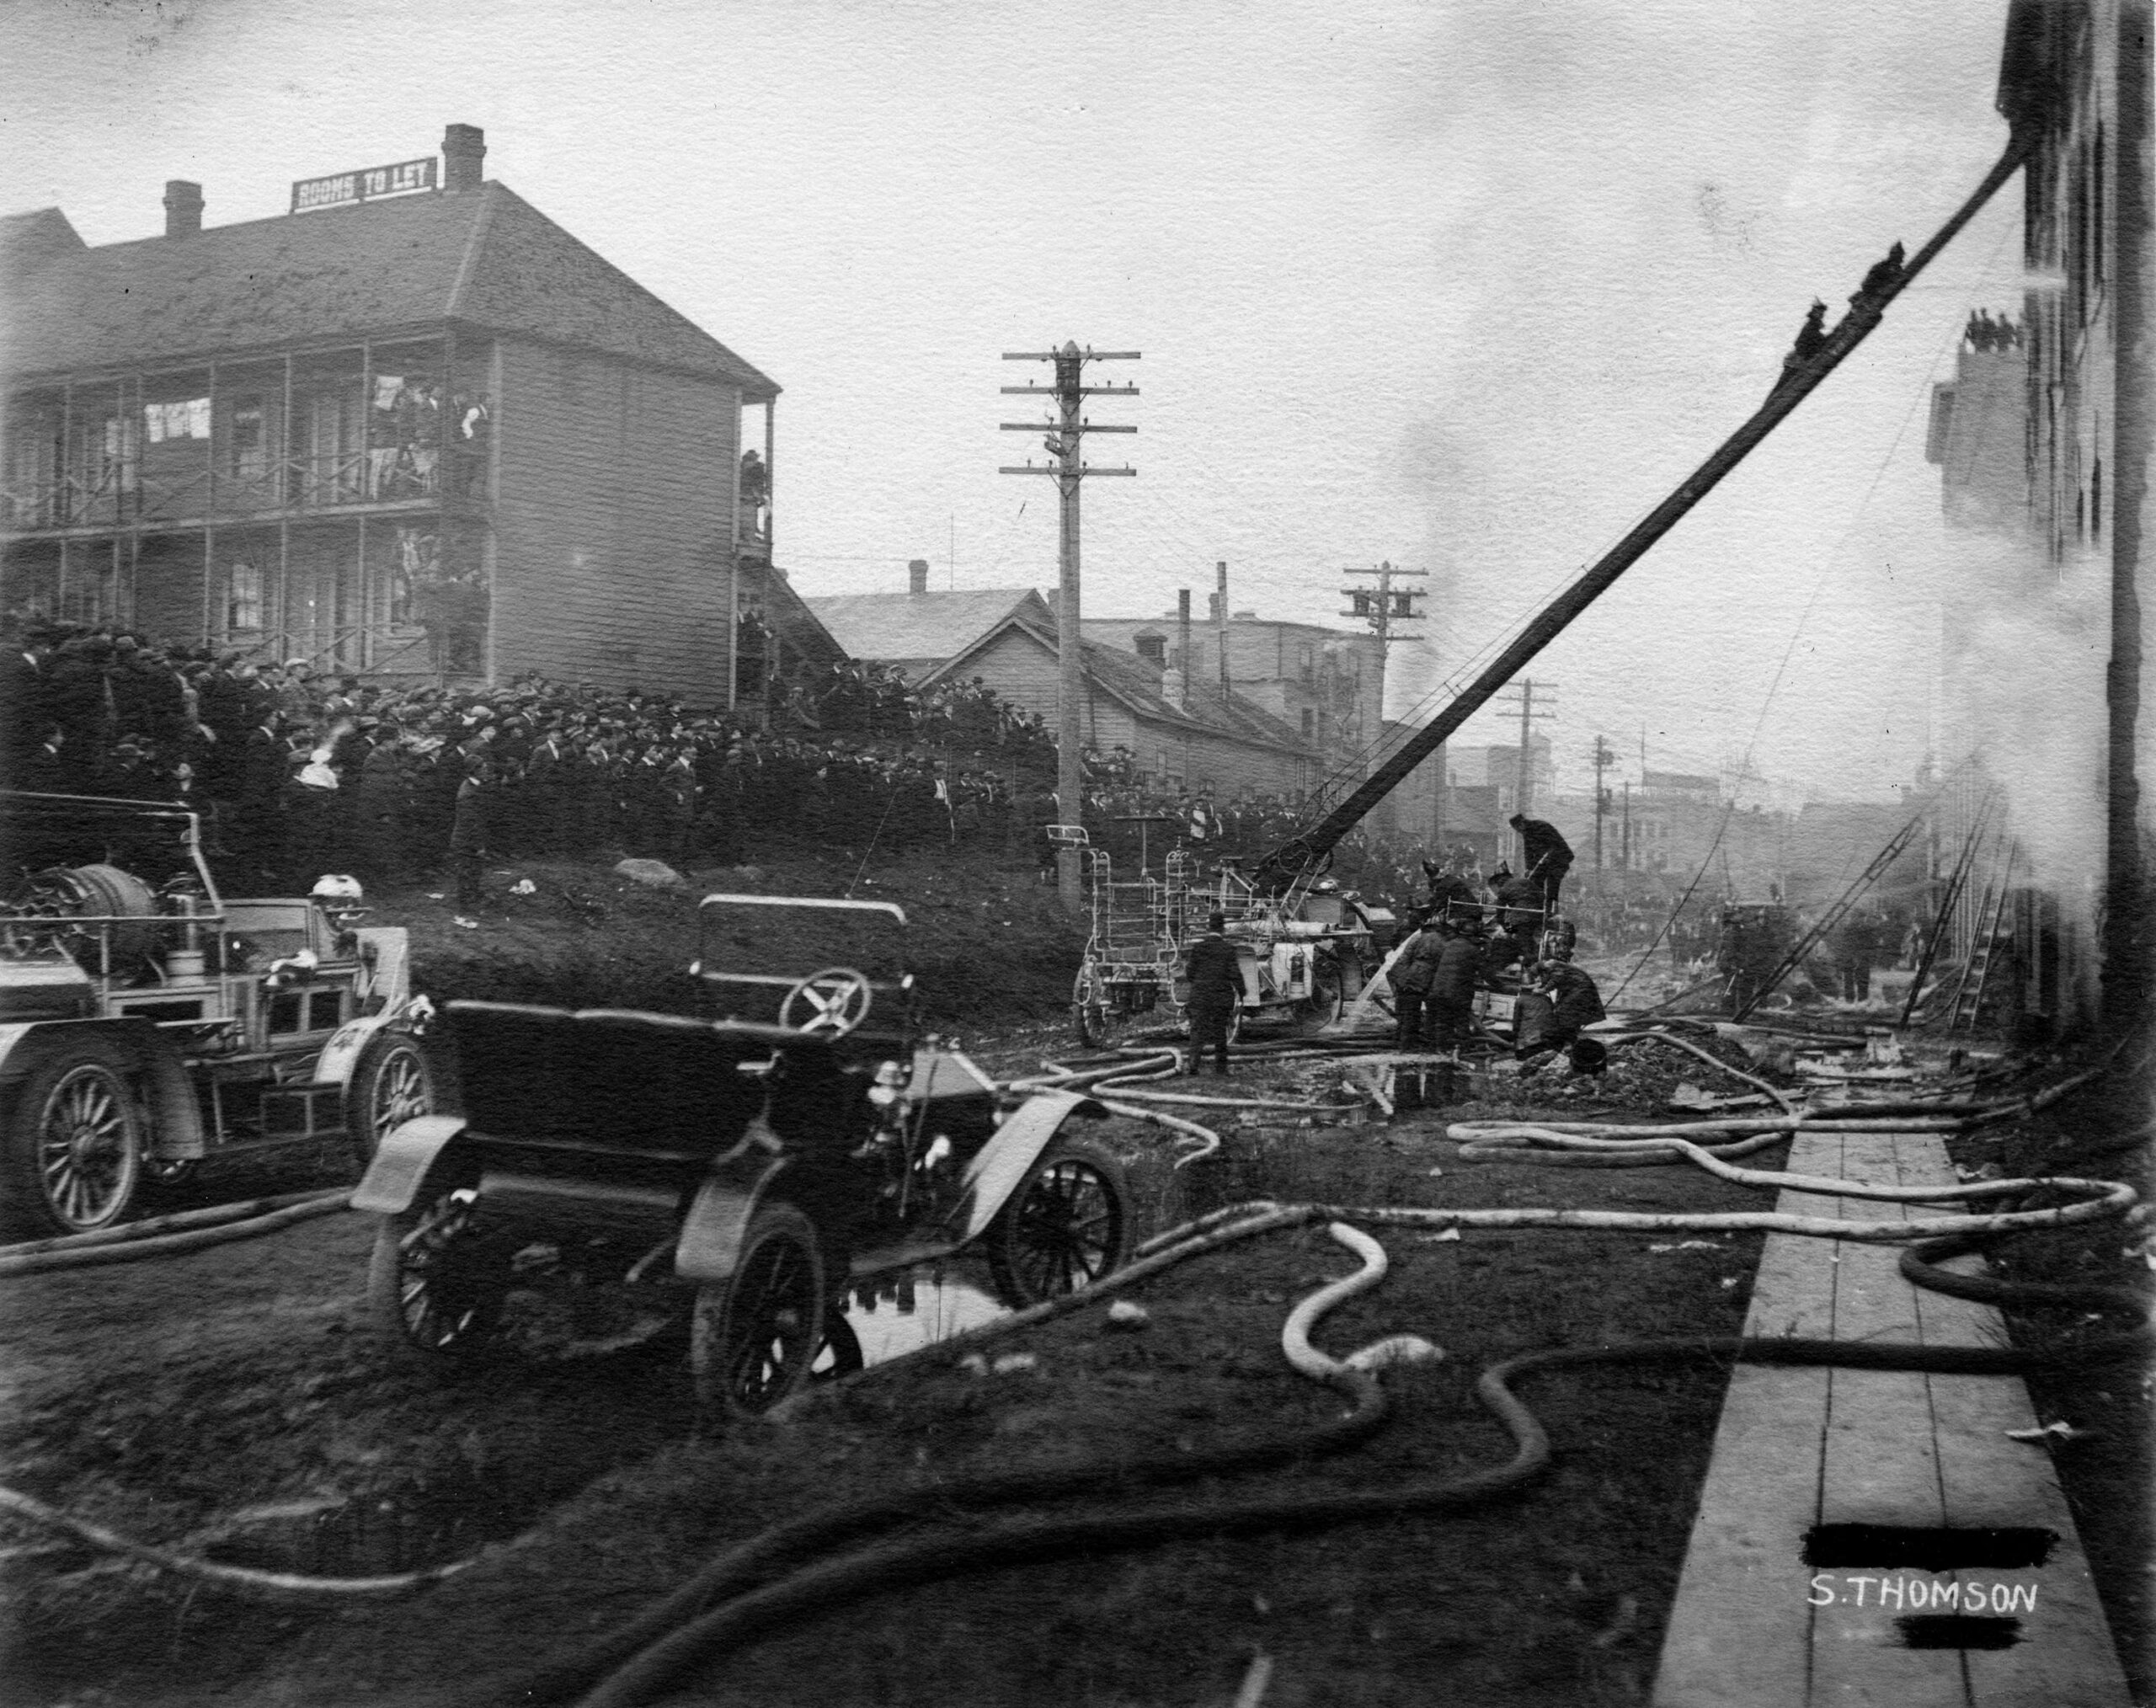 Crowds watching firefighters respond to a warehouse fire, 1910, photographer Stuart Thomson. Reference code: COV-S280-: CVA 354-018